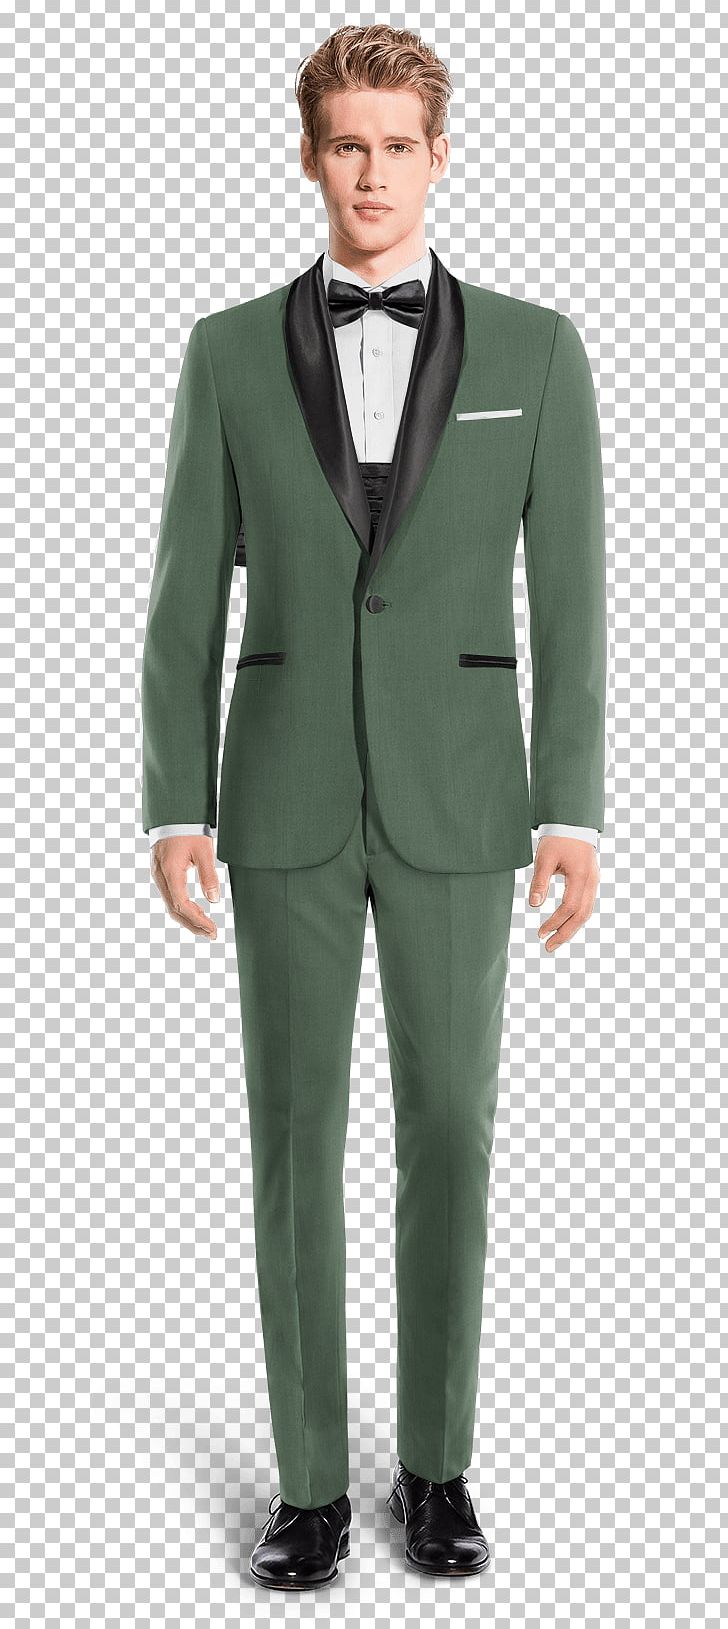 Pants Suit Wool Chino Cloth Tuxedo PNG, Clipart, Beige, Blazer, Blue, Chino Cloth, Corduroy Free PNG Download